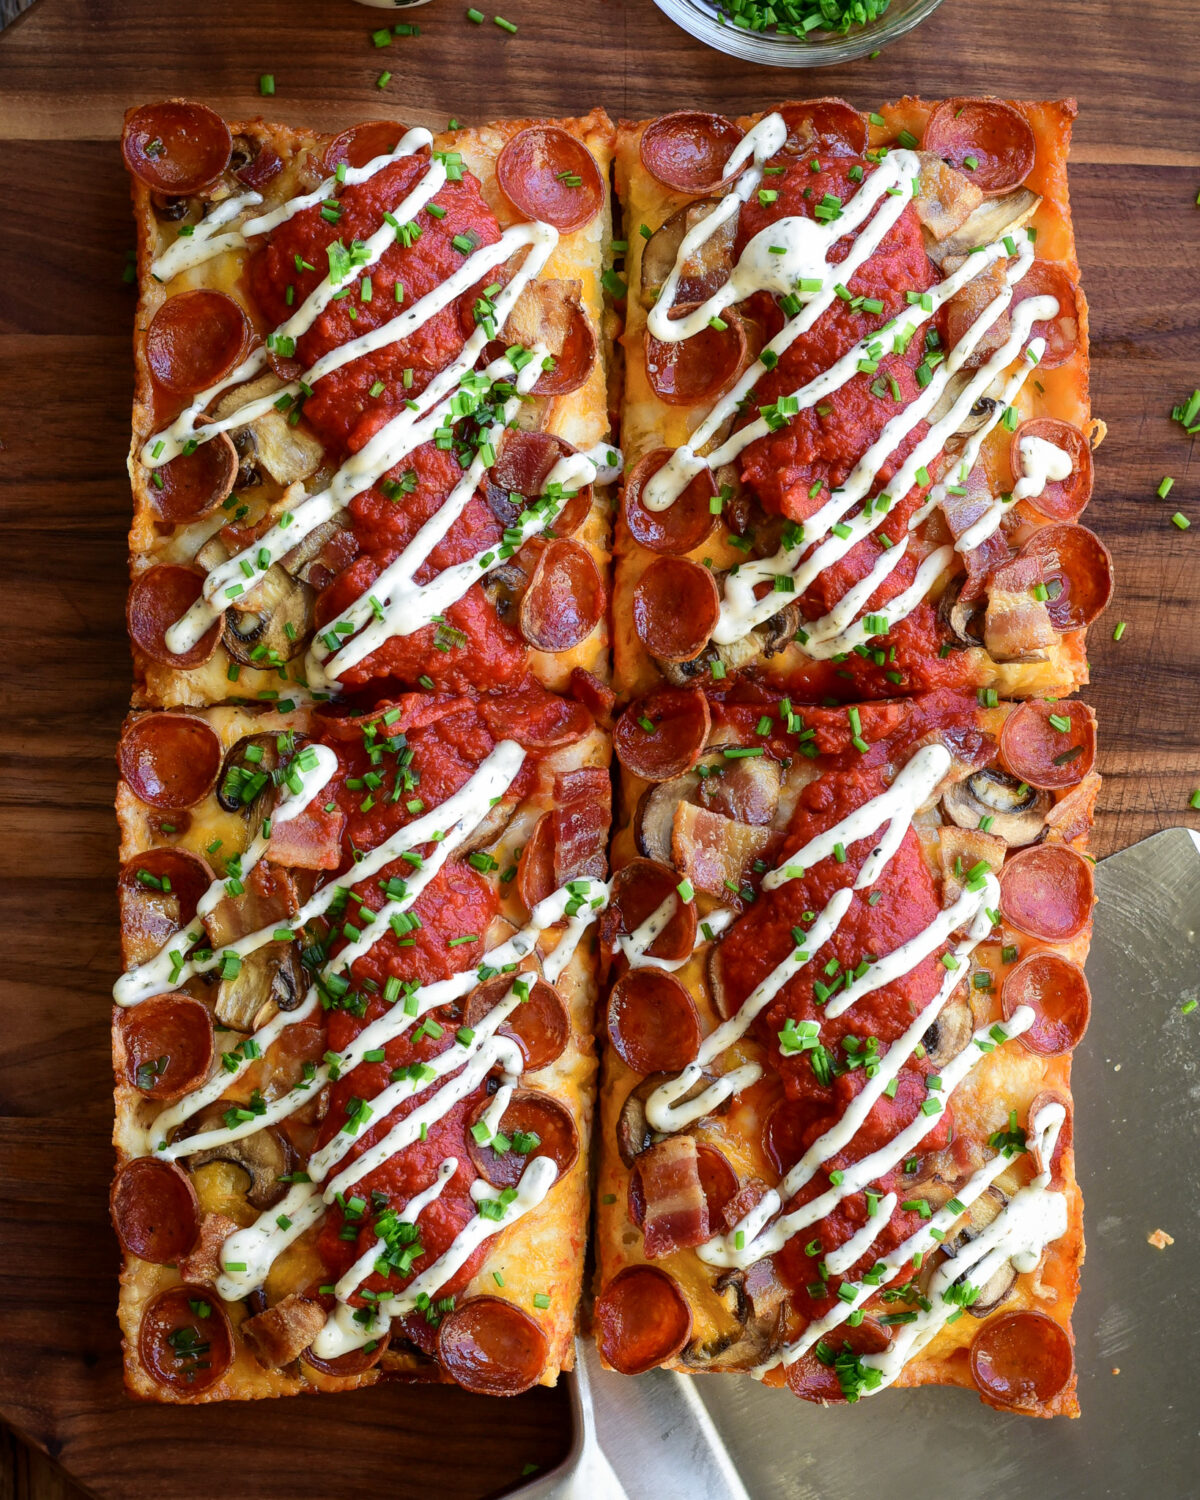 A Detroit-Style Pizza topped with Canadian pizza ingredients.